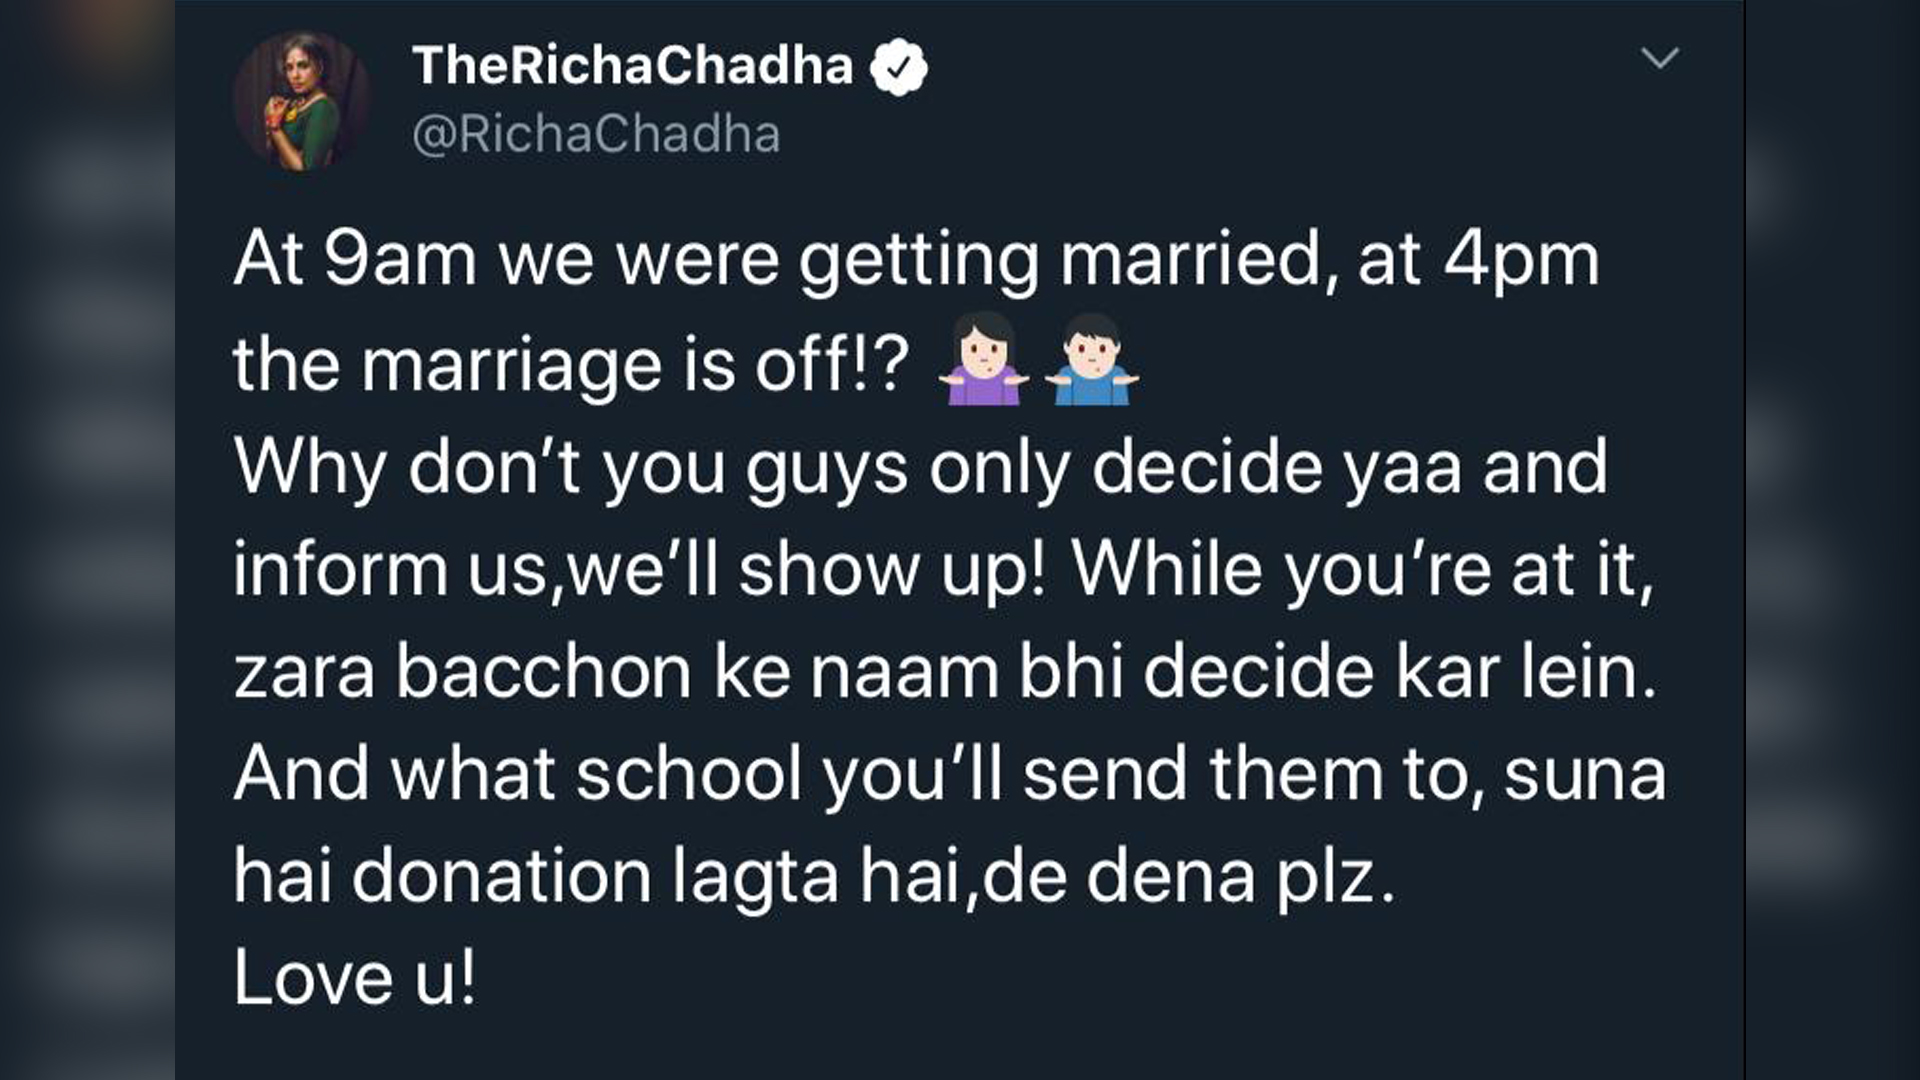 Richa Chadha’s tongue in cheek response about her wedding to beau Ali Fazal is all kinds of awesome!